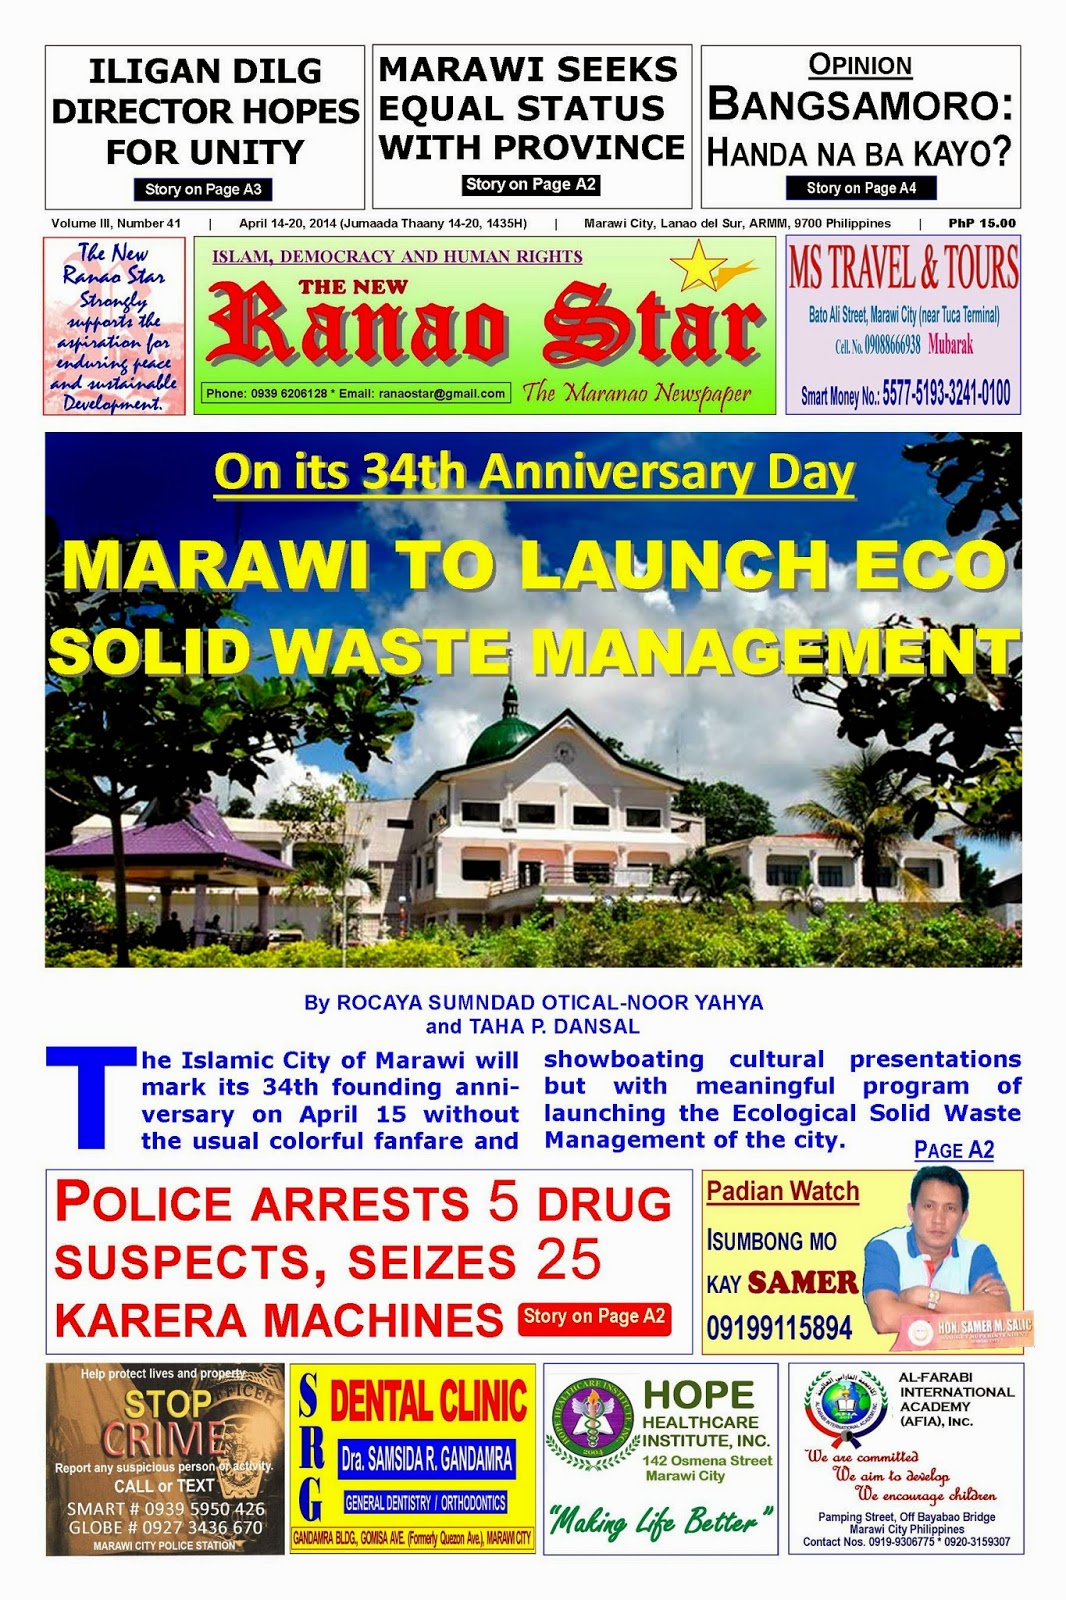 MARAWI TO LAUNCH ECO SOLID WASTE MANAGEMENT